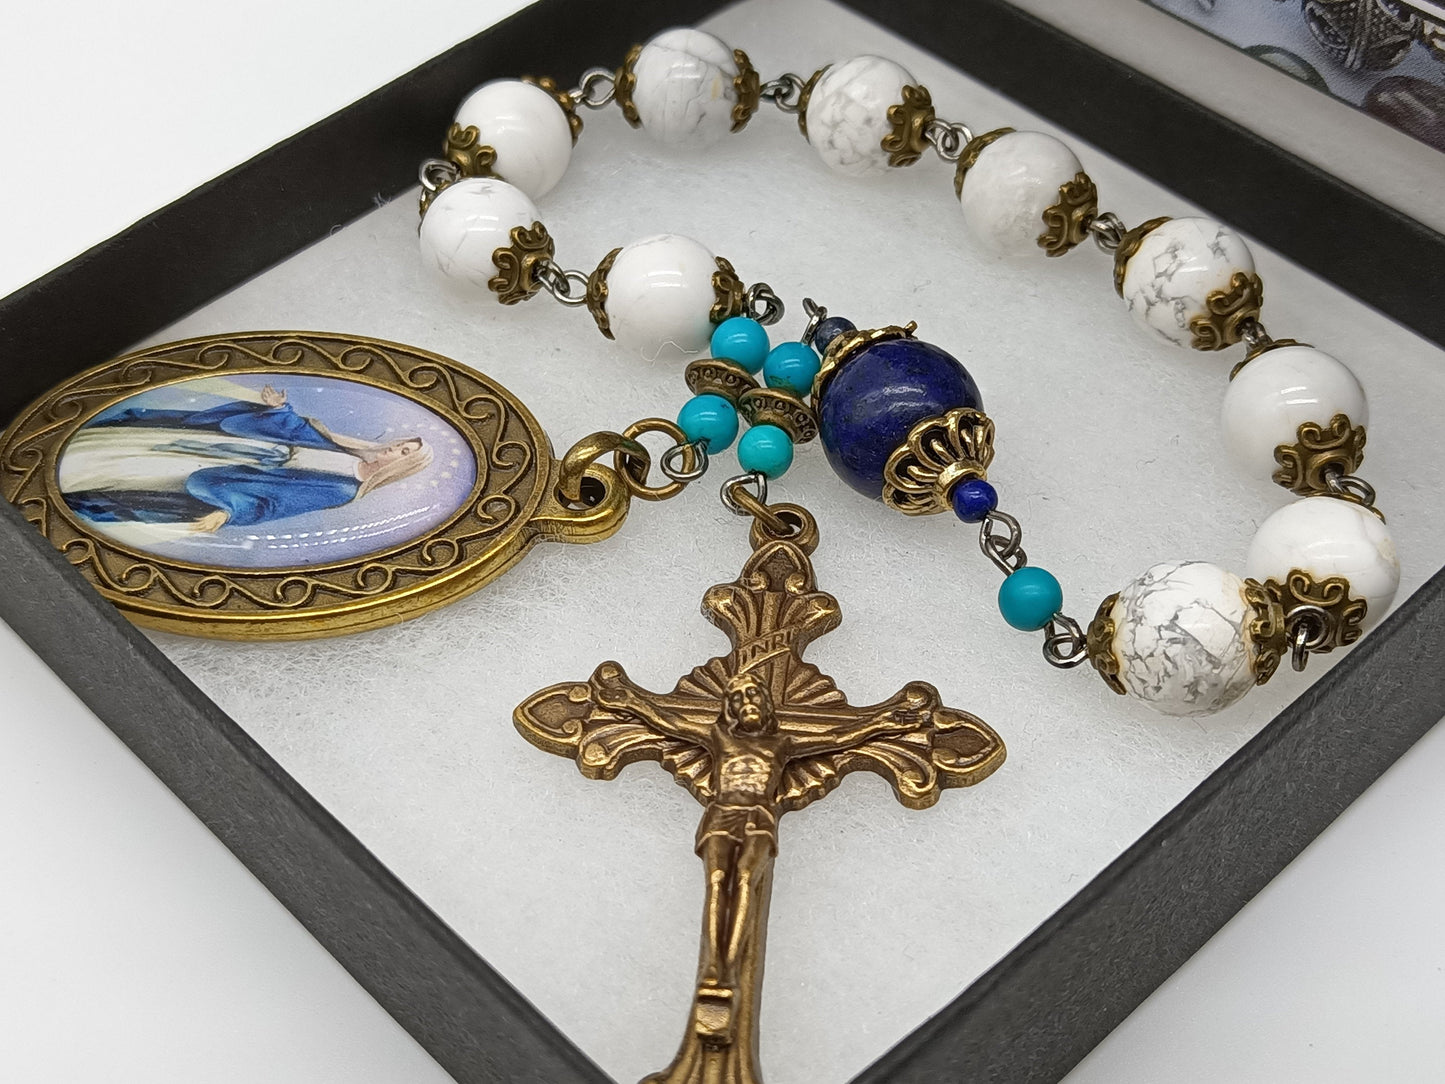 Large tenner vintage style gemstone rosary, Our Lady of Grace rosary beads, Vintage style Rosary beads, Pocket Rosary beads.